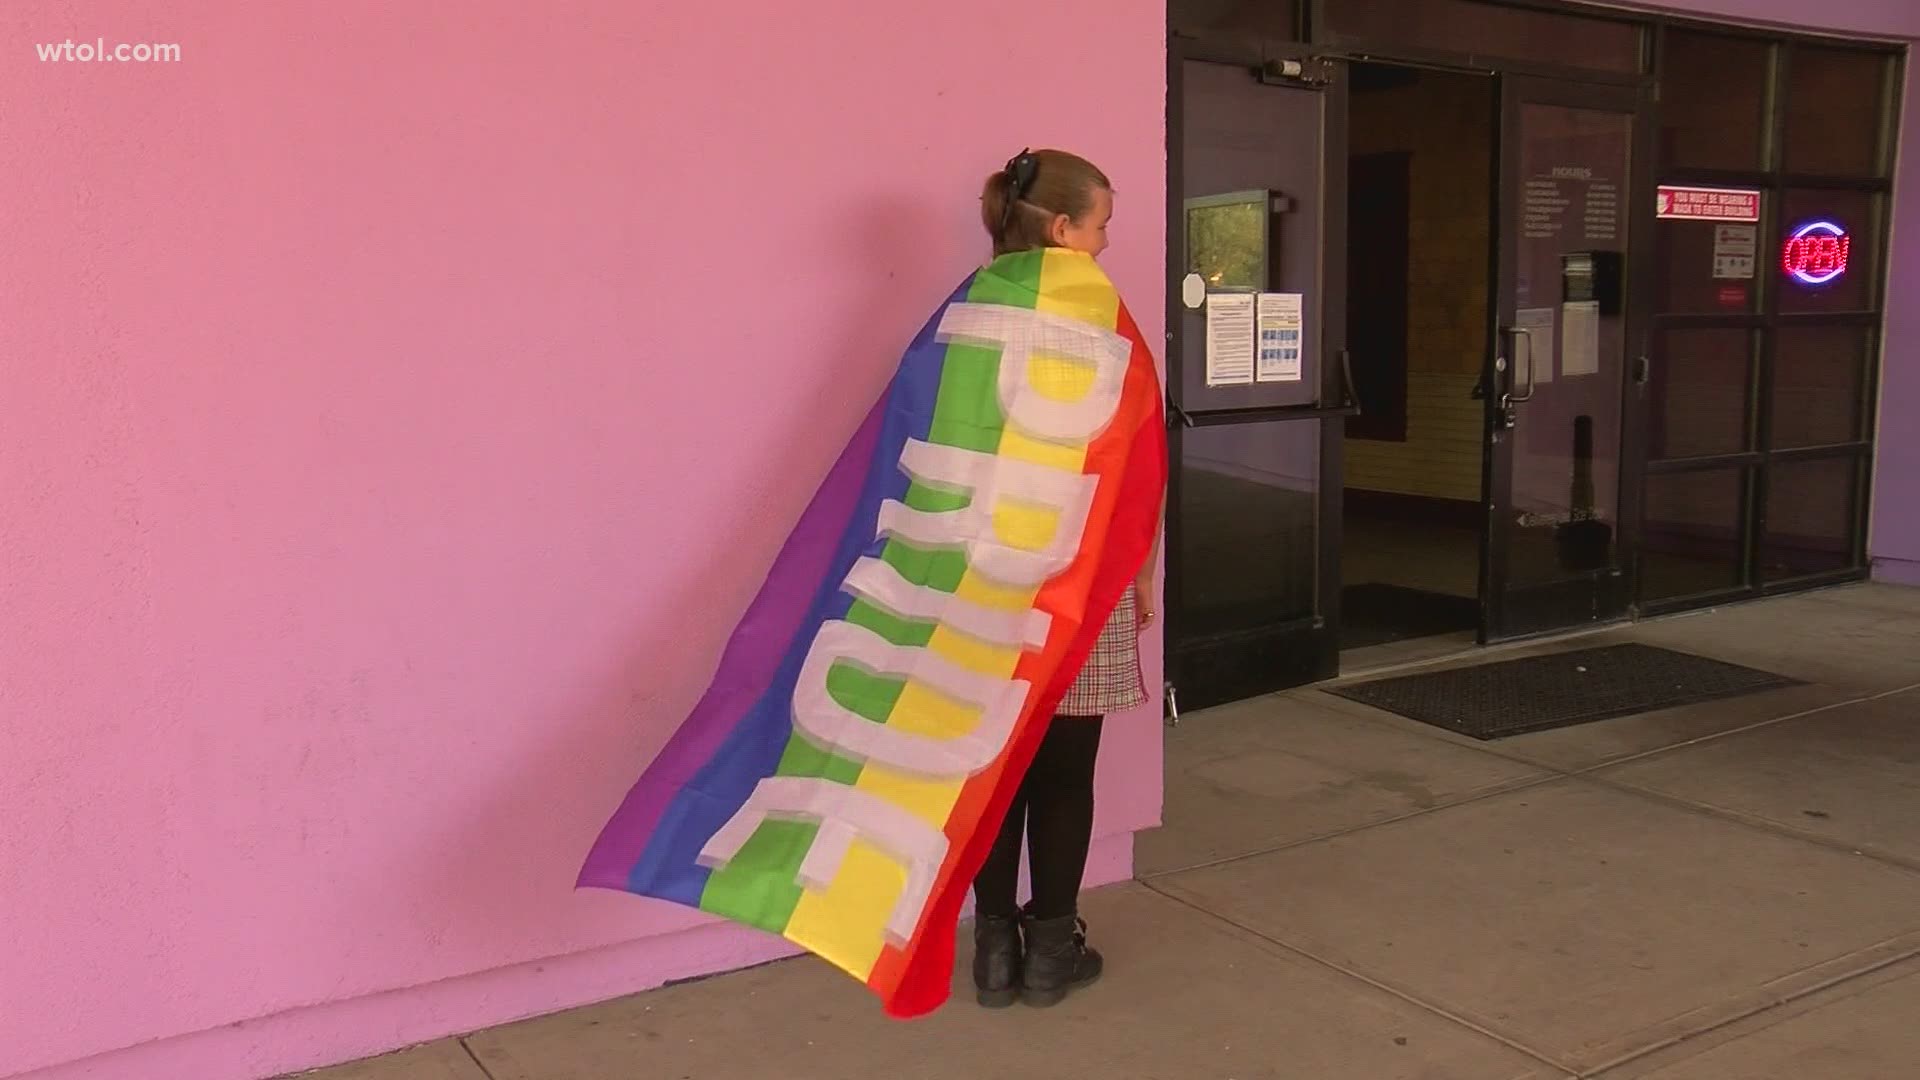 Toledo's LGBTQ community celebrated virtually across the city for this year's Pride event.